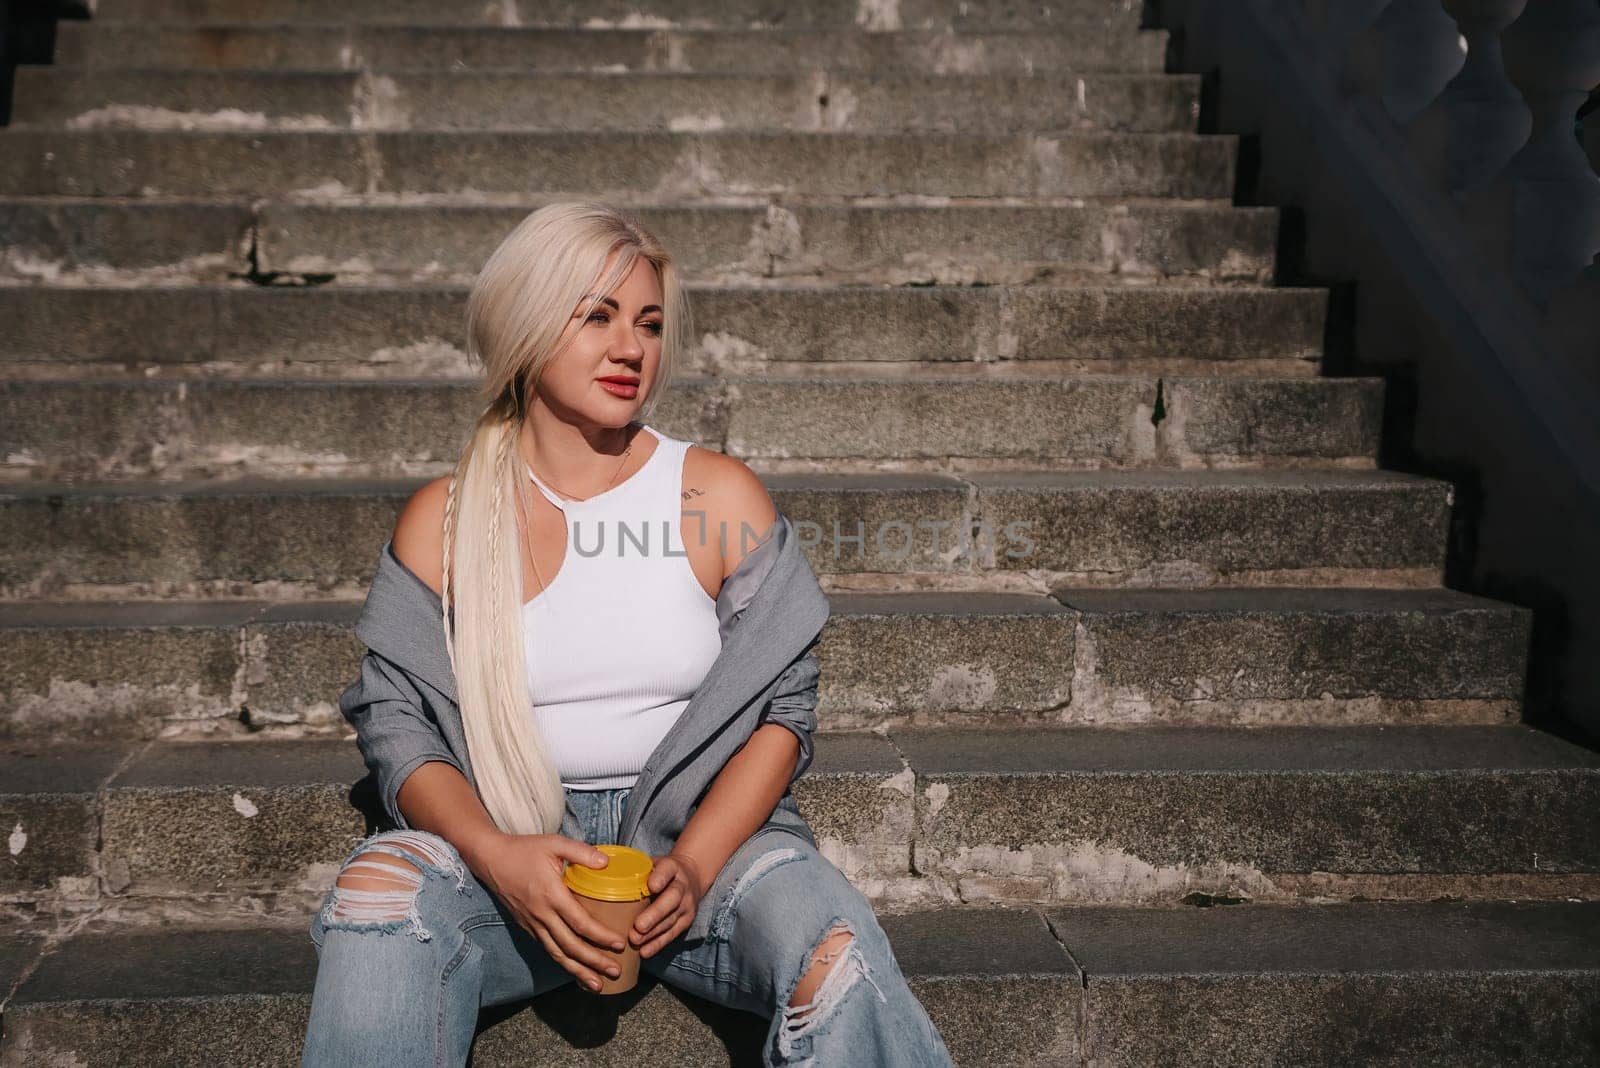 A blonde woman sits on a set of stairs, holding a cup. She is wearing a gray jacket and blue jeans. by Matiunina